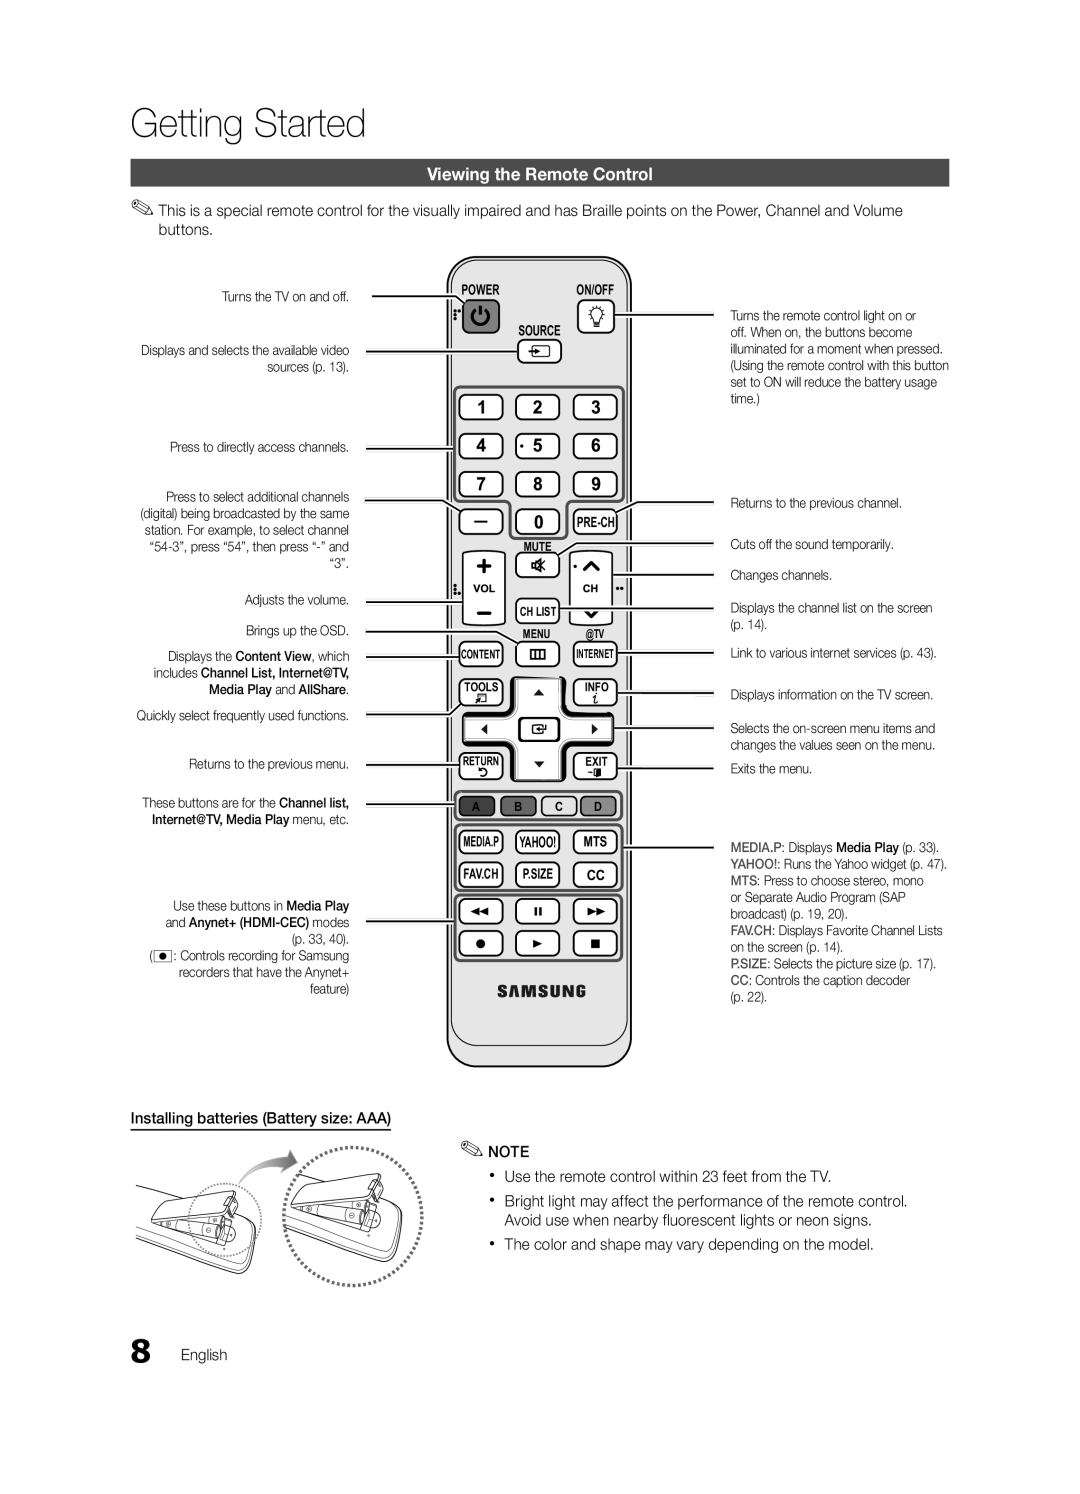 Samsung BN68-02711B-04, UC6500-ZC Viewing the Remote Control, Getting Started, Installing batteries Battery size AAA 